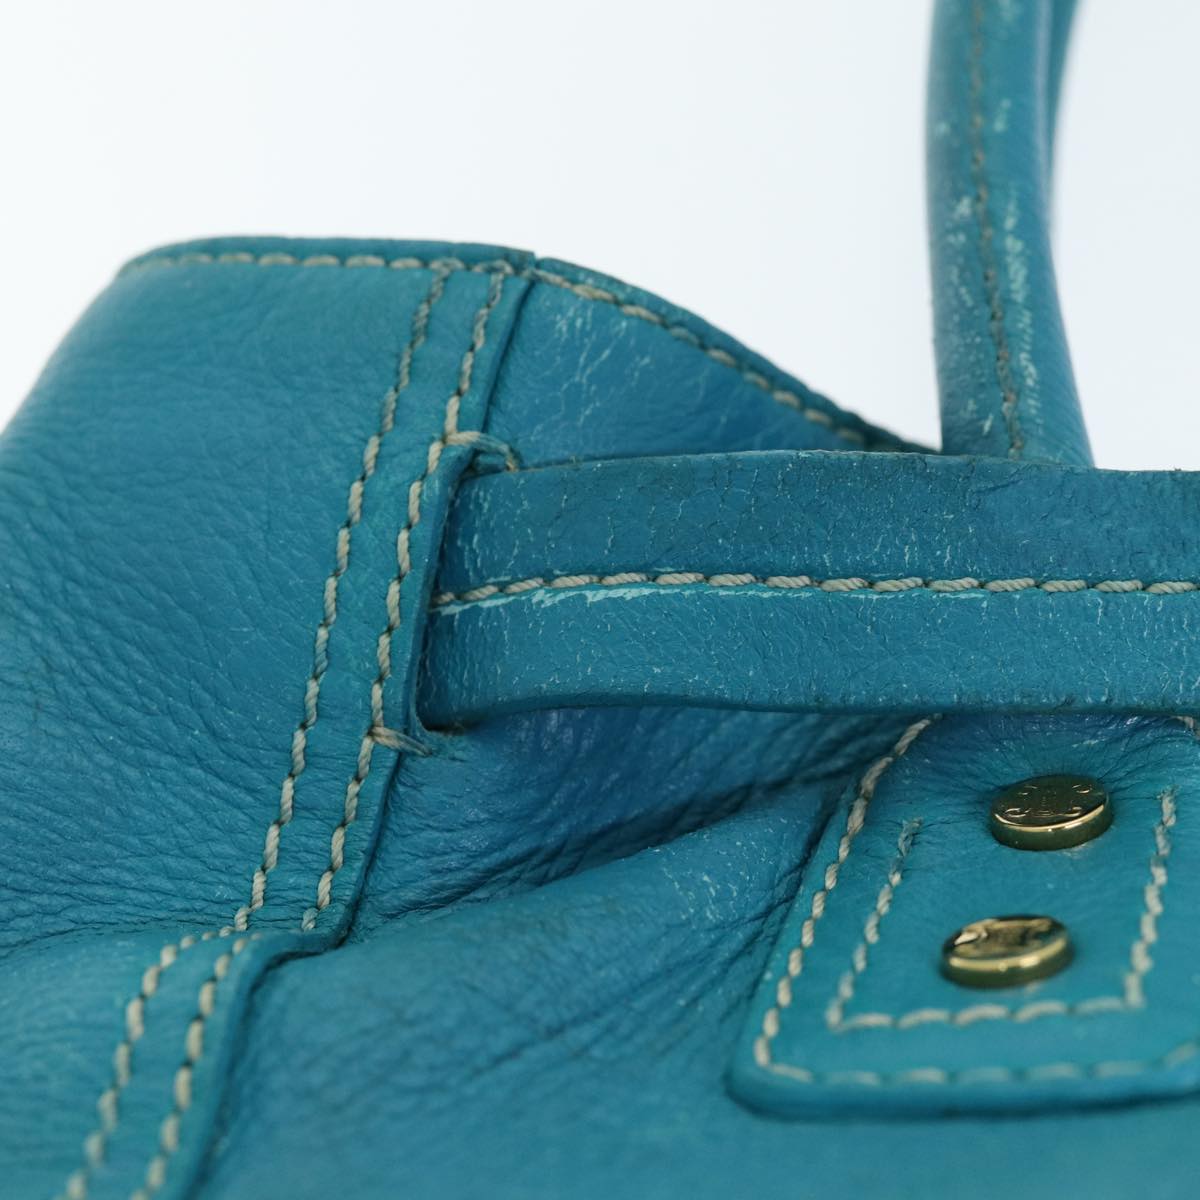 CELINE Tote Bag Leather Turquoise Blue Auth 74223